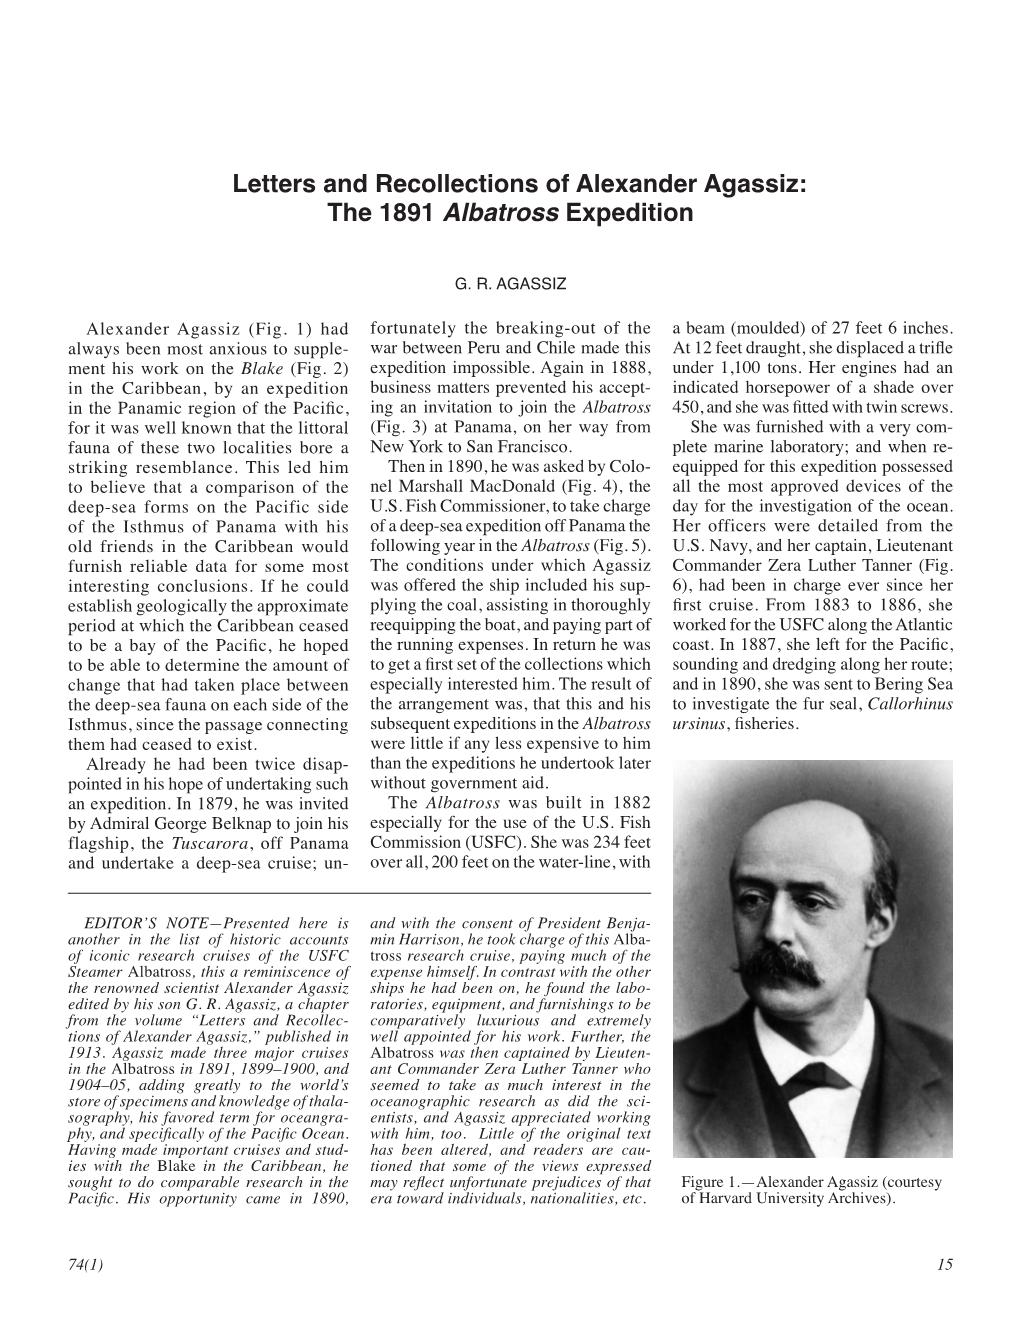 Letters and Recollections of Alexander Agassiz: the 1891 Albatross Expedition